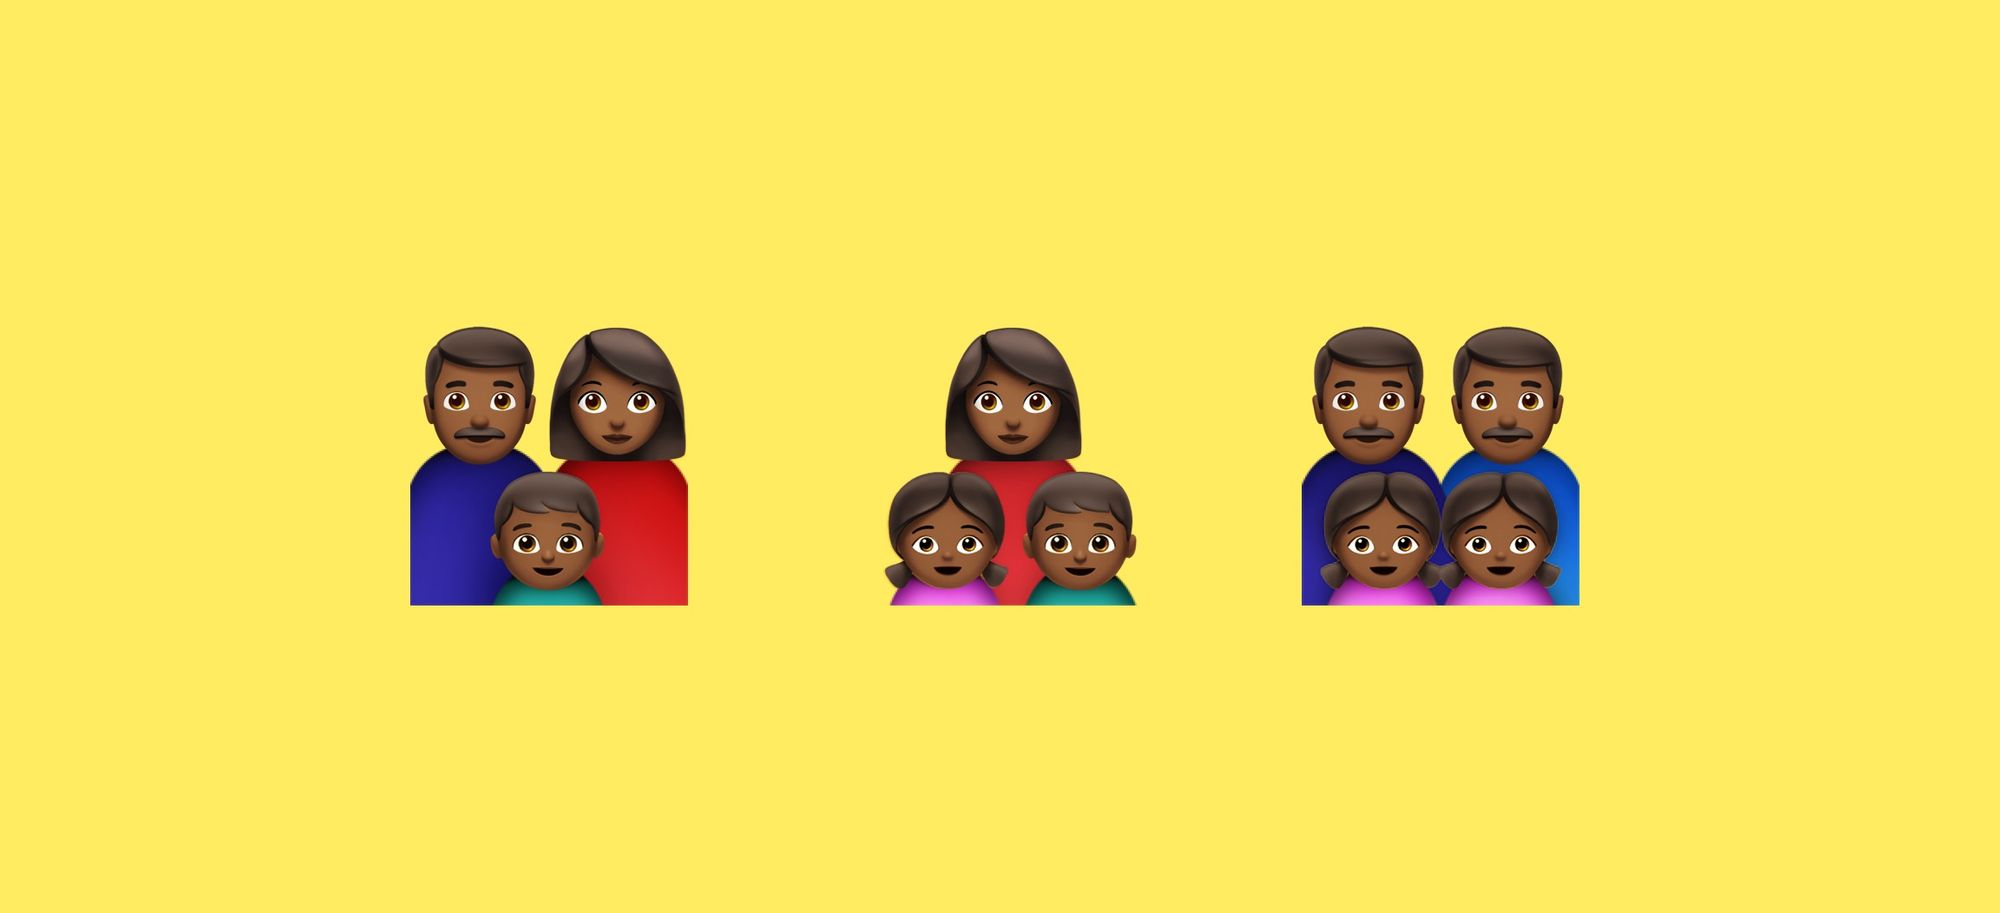 Why There Aren't Black Family Emojis